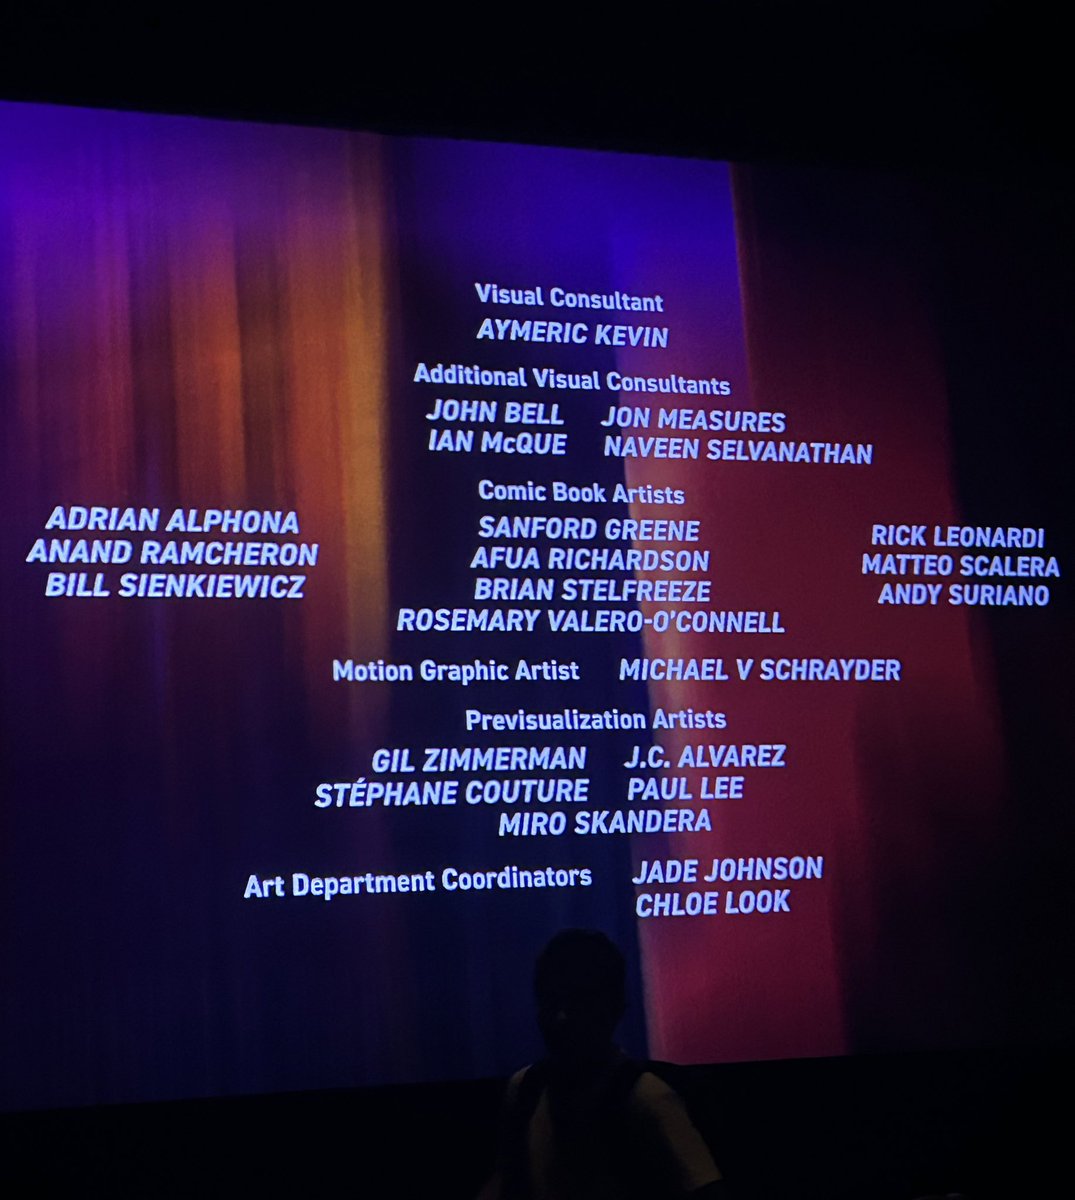 Fully surreal to see my name in the credits of a movie on the big screen!! Happy #SpiderVerse day to all the unbelievably talented people who worked so hard to make this incredible thing!